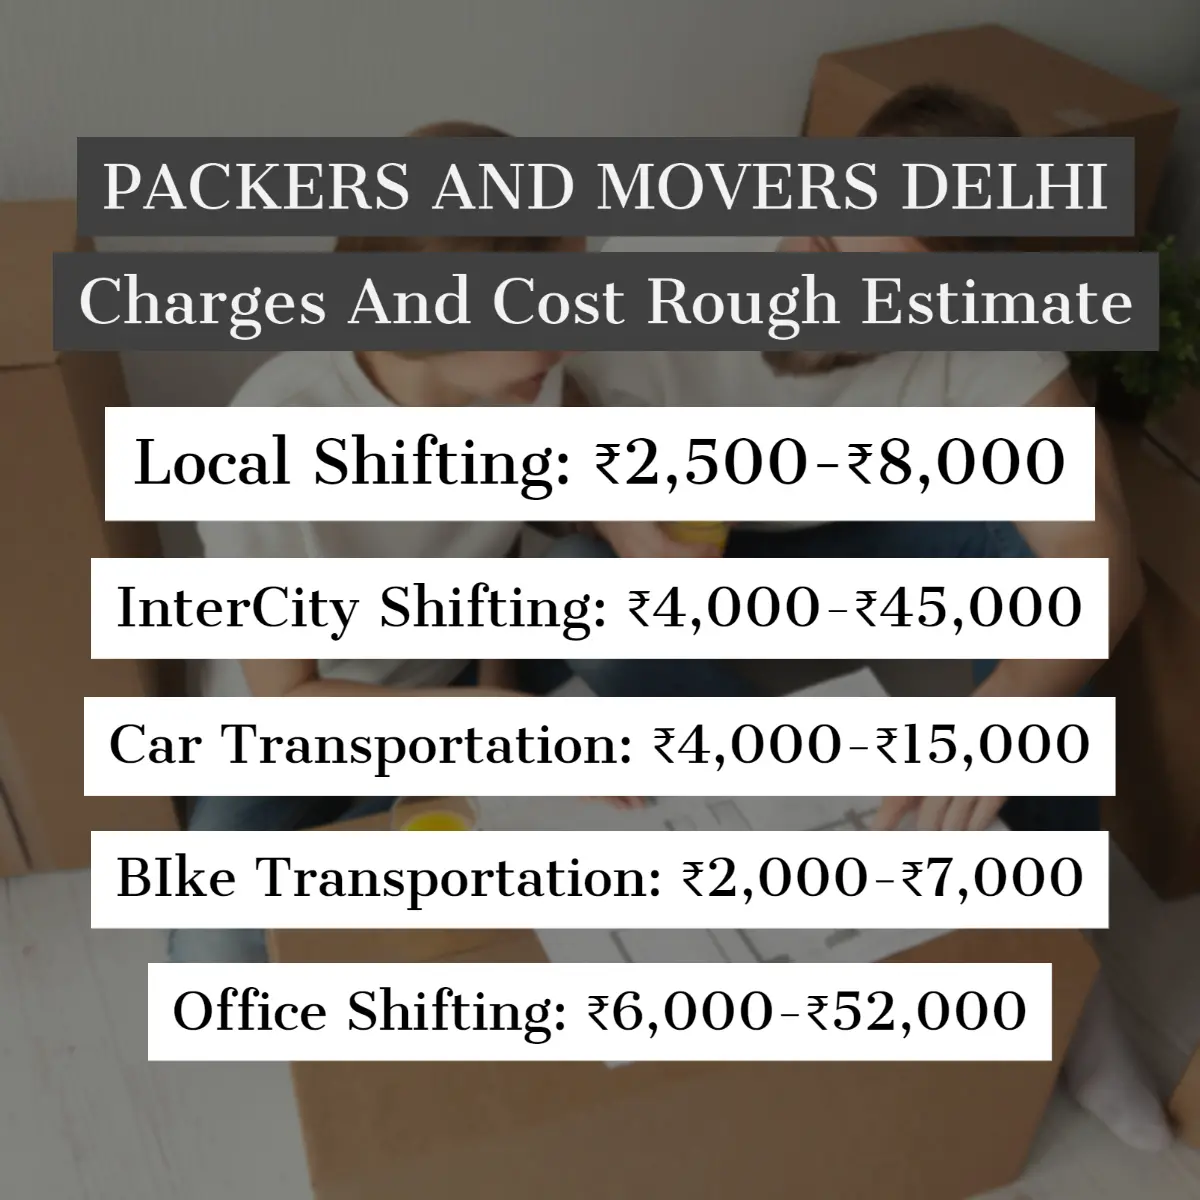 Packers and Movers Delhi Charges